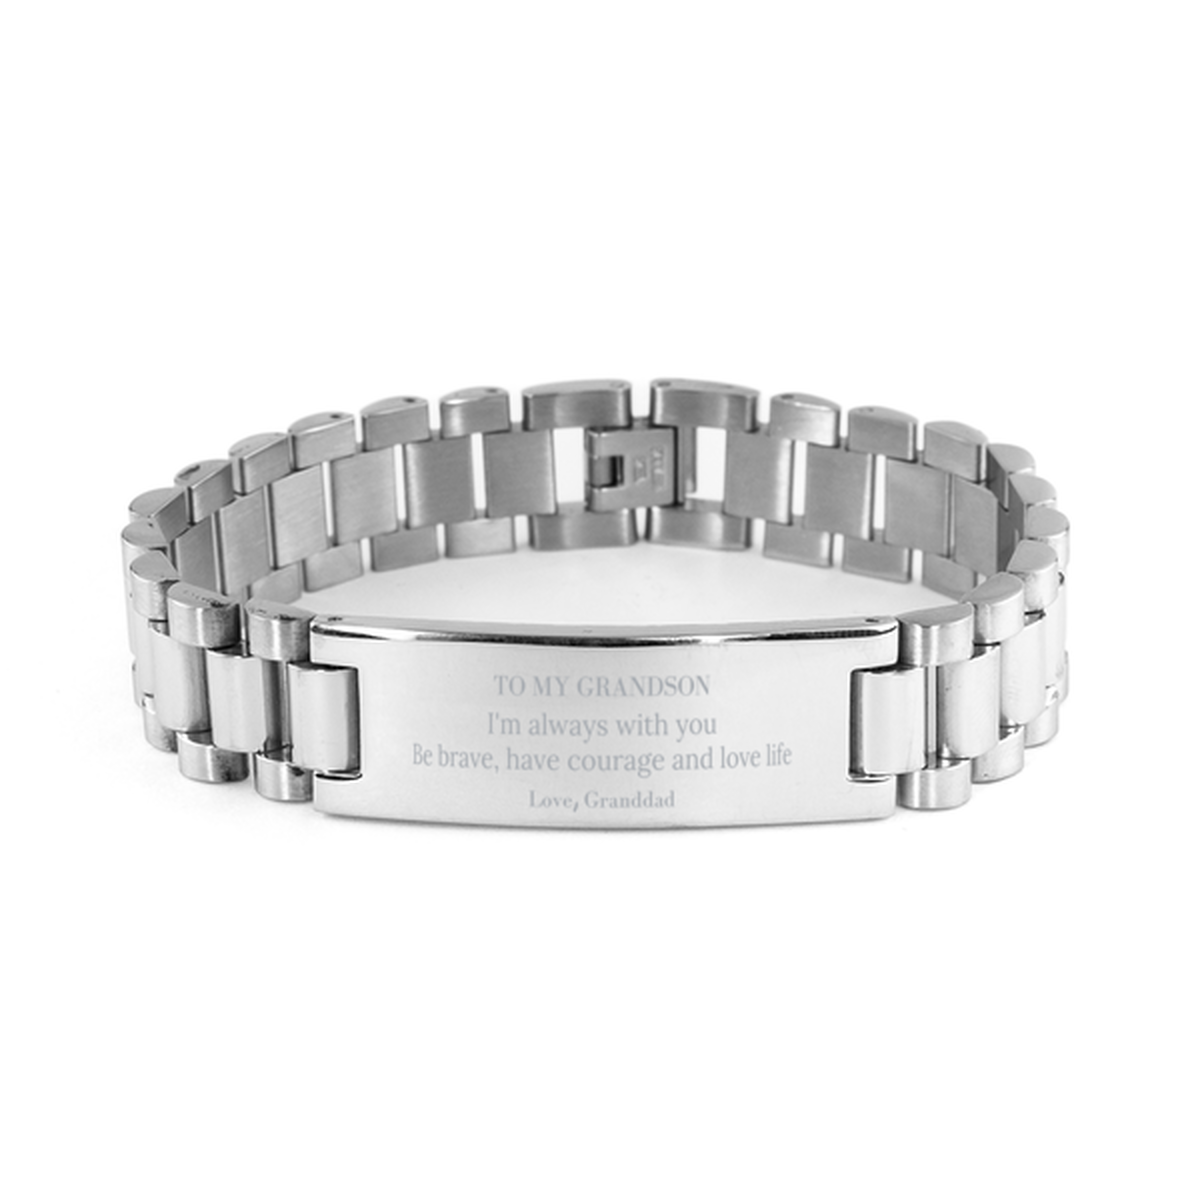 To My Grandson Gifts from Granddad, Unique Ladder Stainless Steel Bracelet Inspirational Christmas Birthday Graduation Gifts for Grandson I'm always with you. Be brave, have courage and love life. Love, Granddad